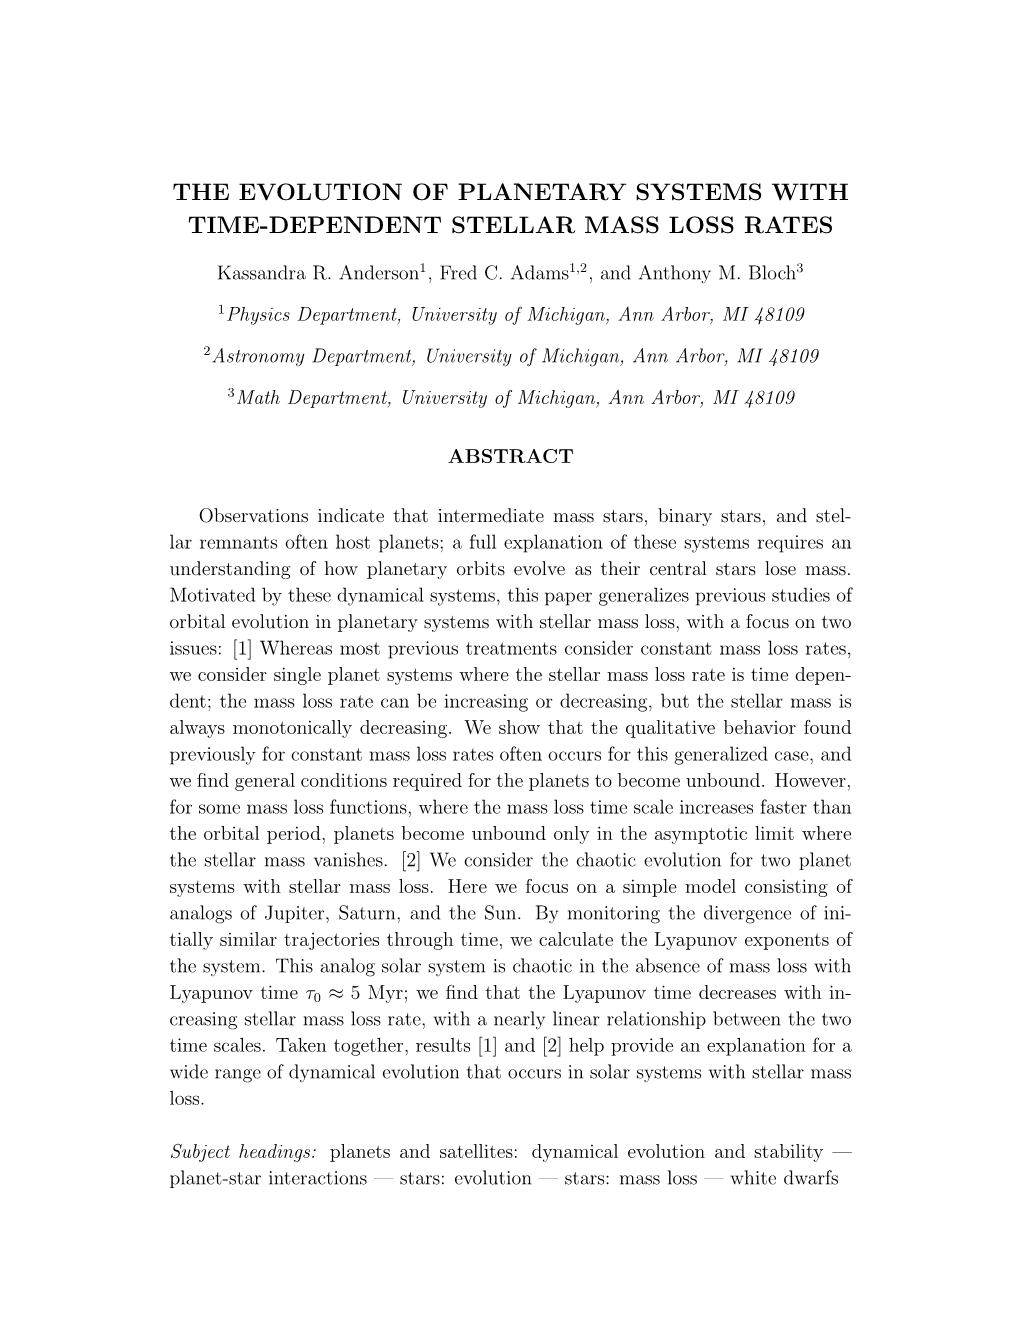 The Evolution of Planetary Systems with Time-Dependent Stellar Mass Loss Rates